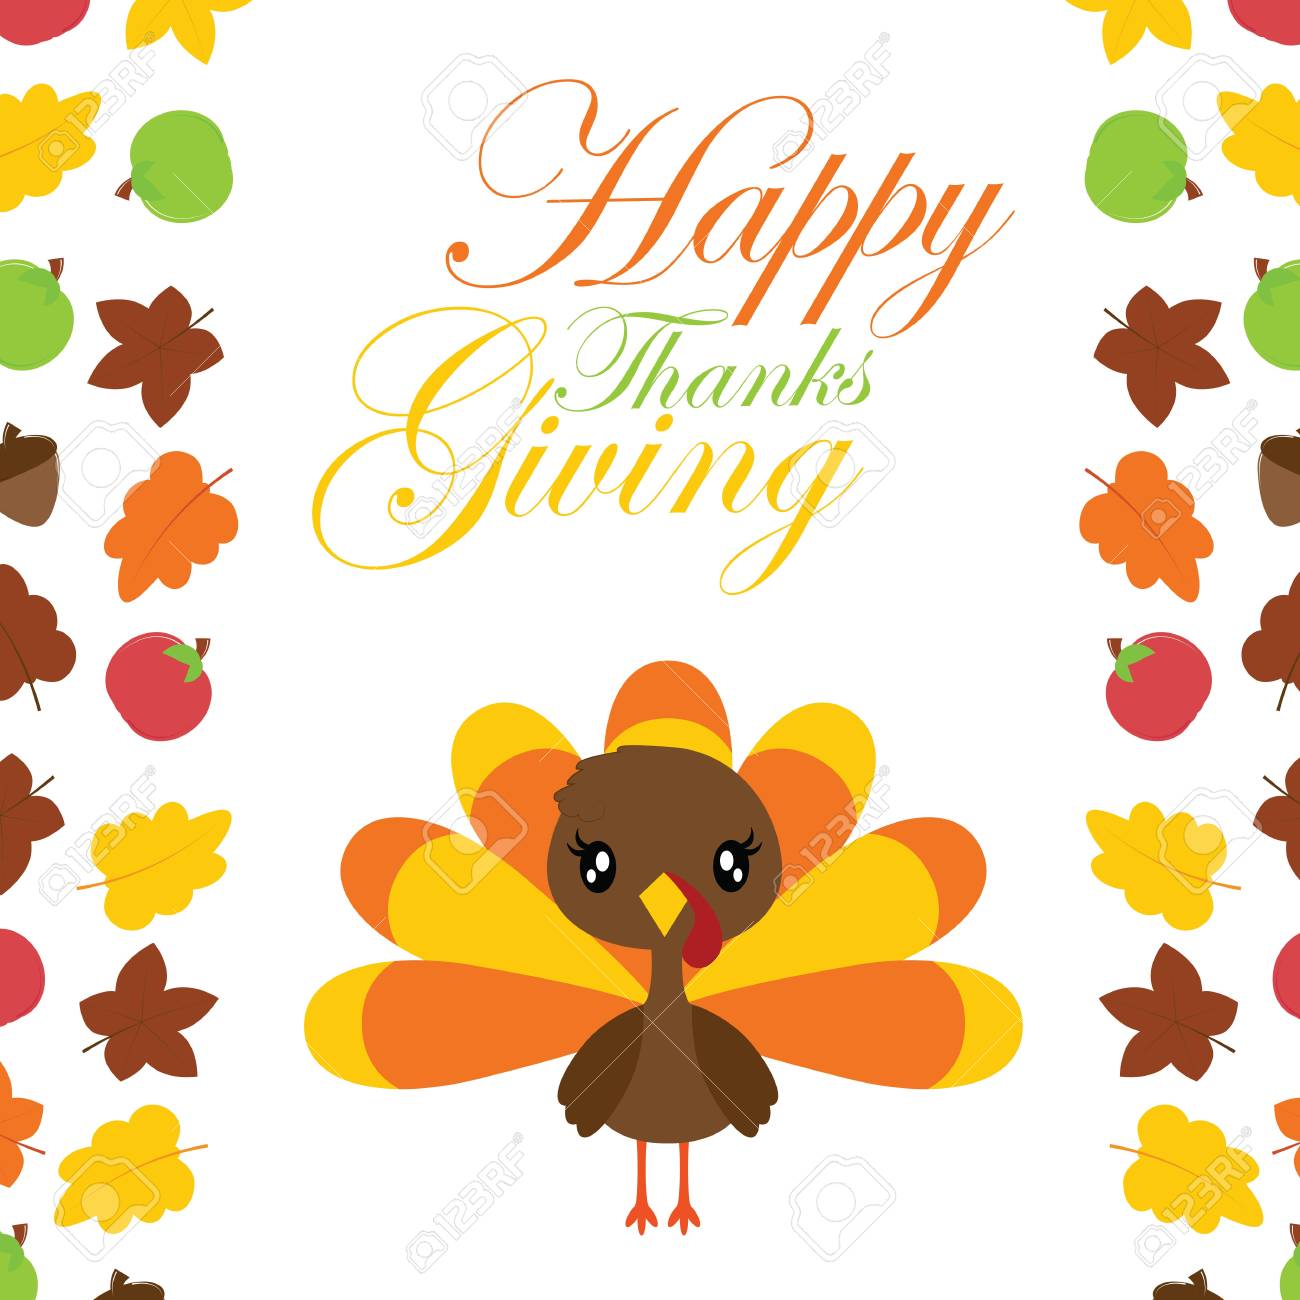 Cute Turkey Girl In The Middle Of Maples Leaves Border Vector